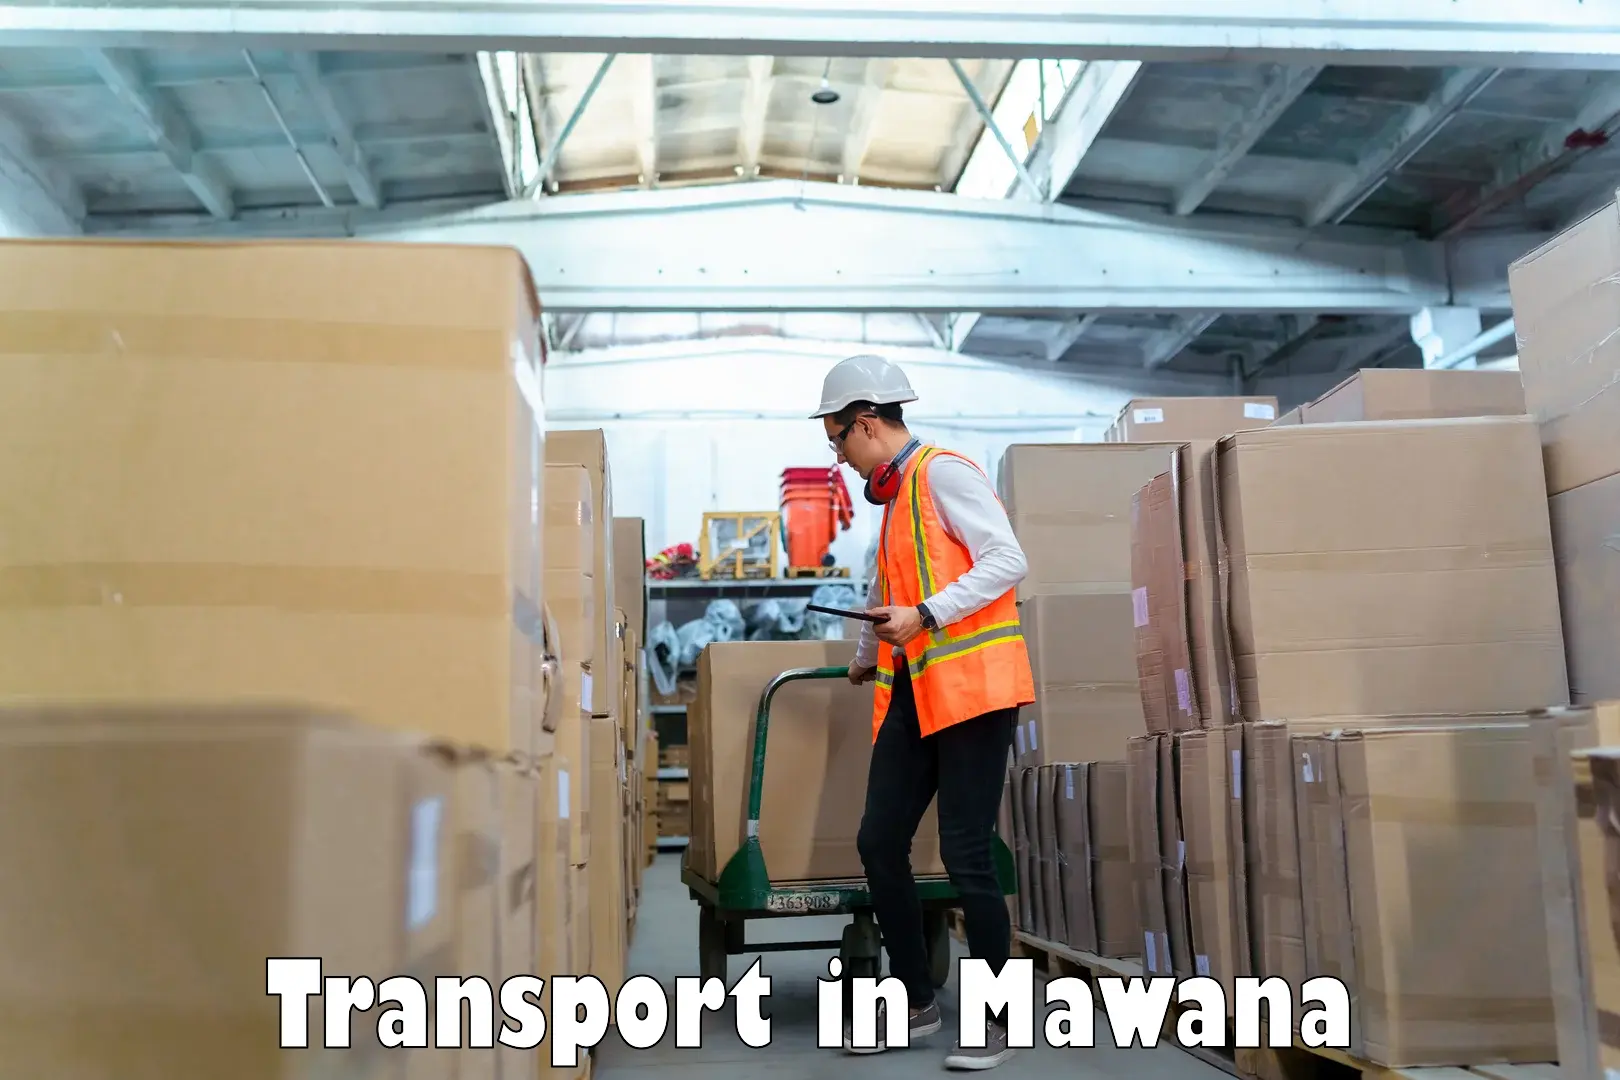 Air cargo transport services in Mawana